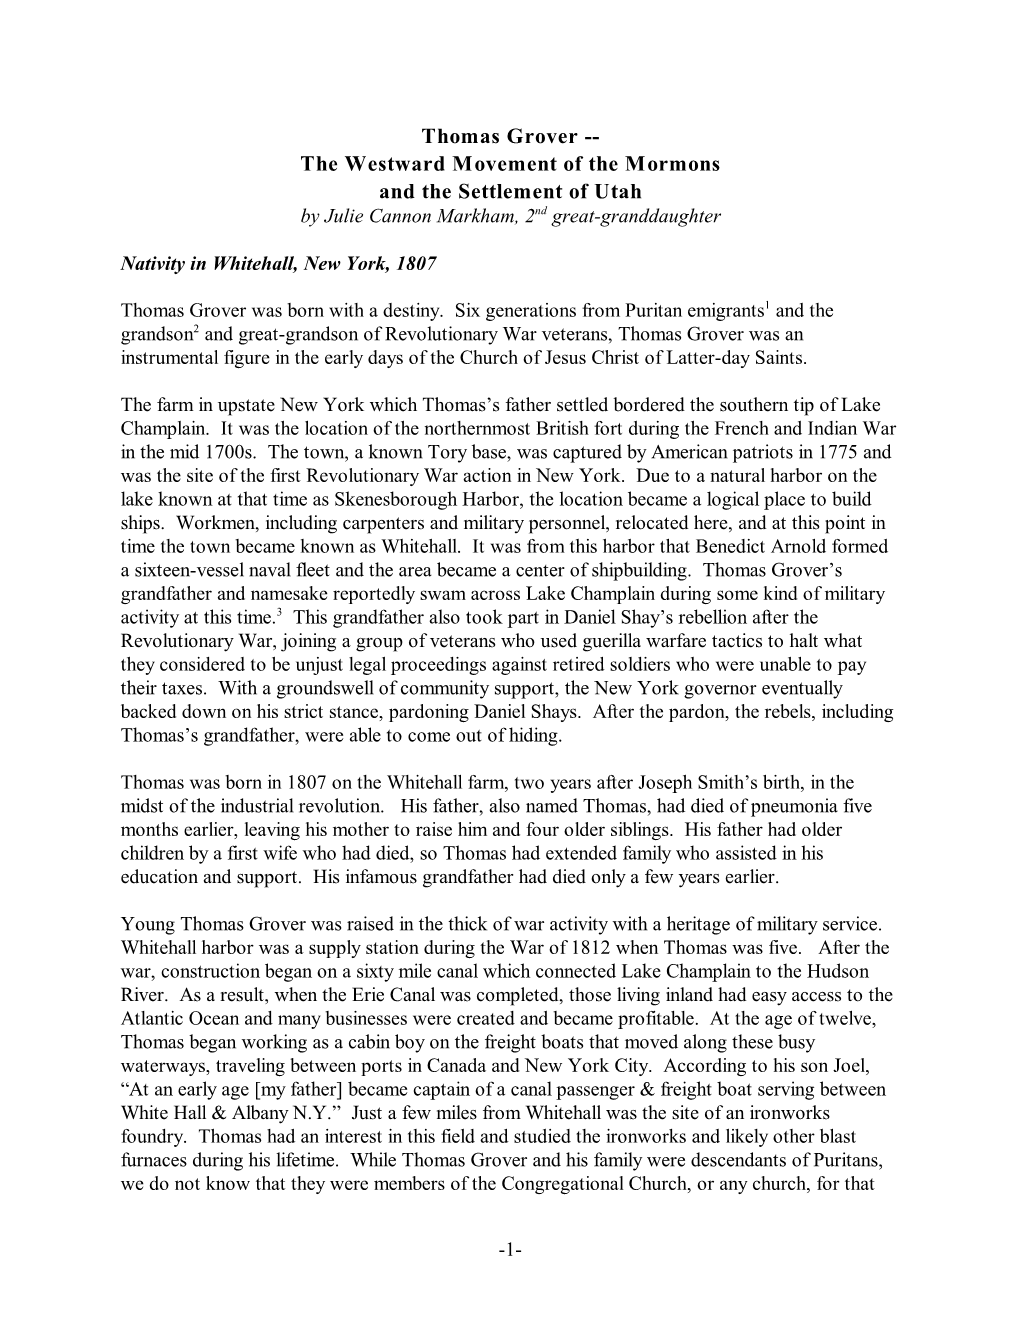 Thomas Grover -- the Westward Movement of the Mormons and the Settlement of Utah by Julie Cannon Markham, 2Nd Great-Granddaughter